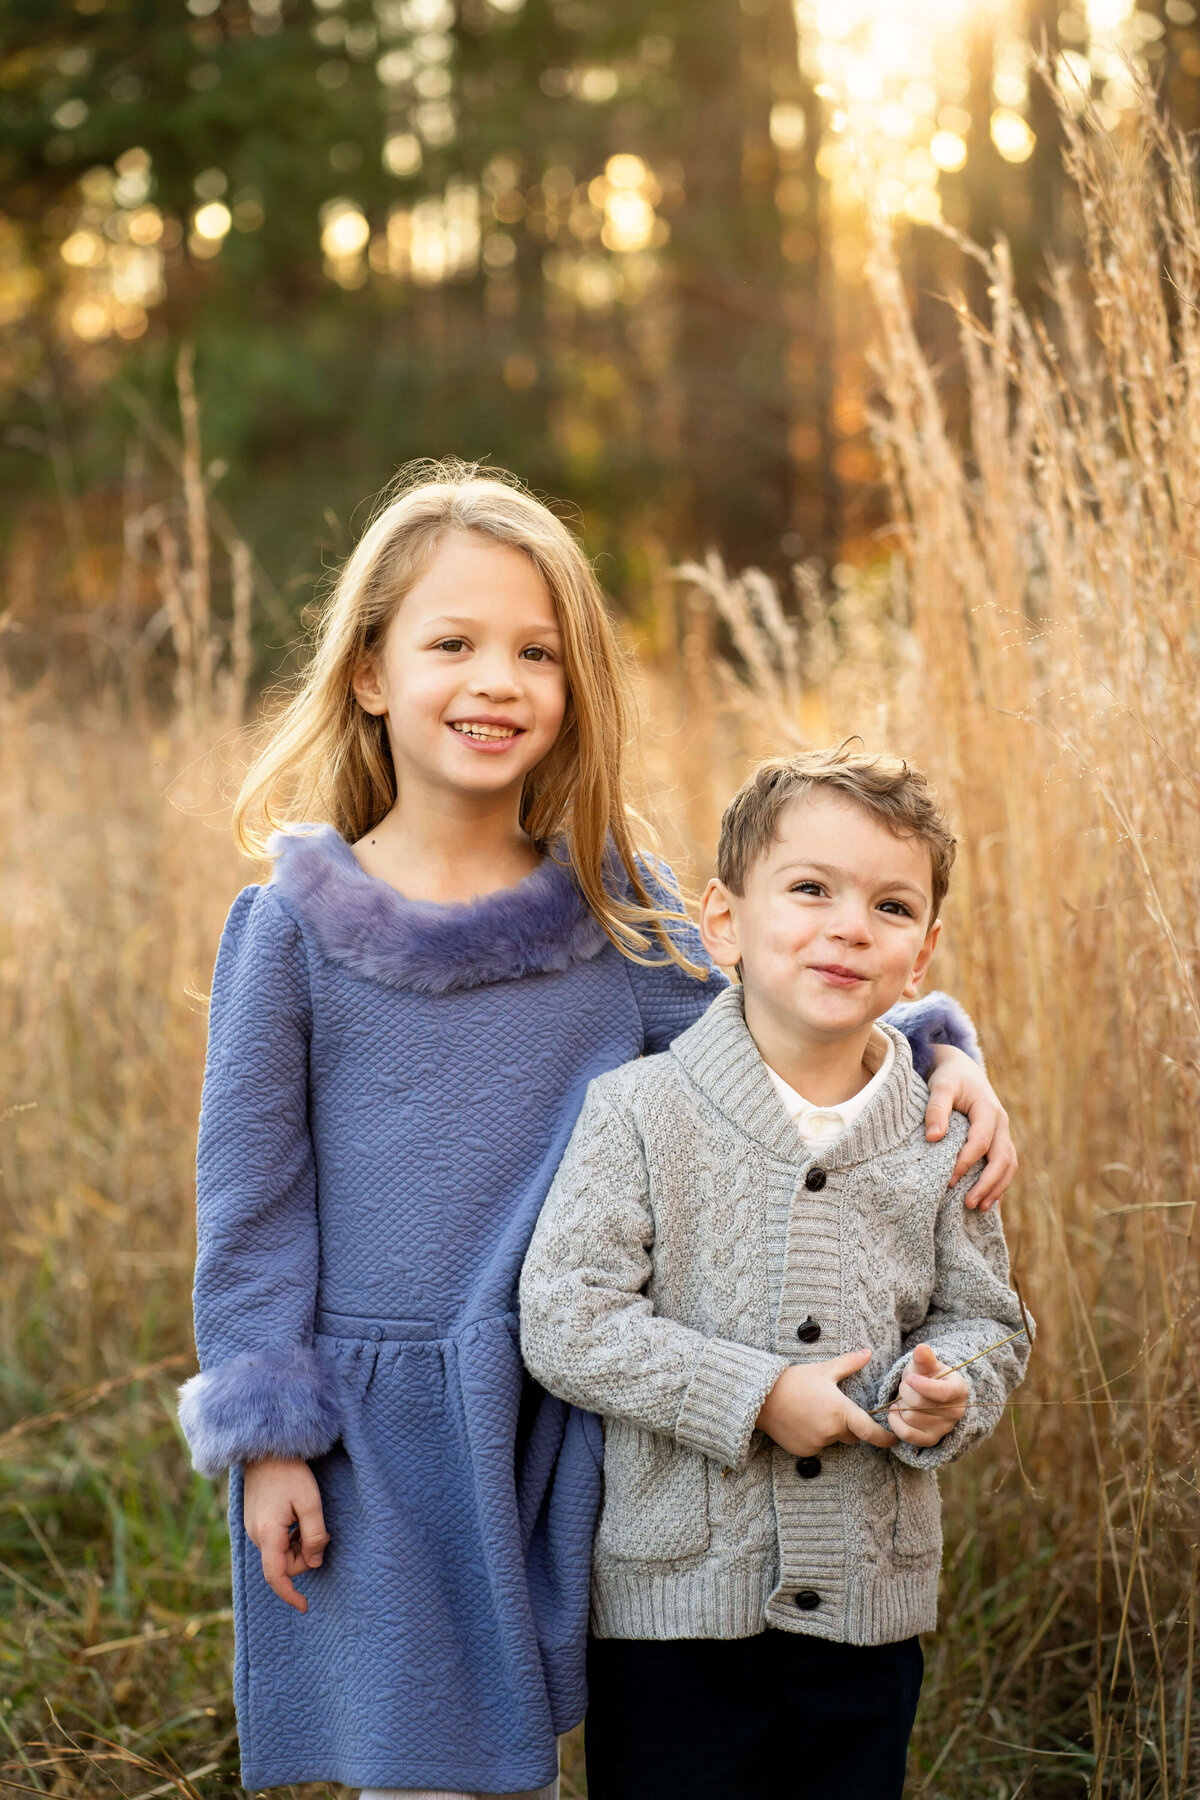 Young brother and sister smiling at camera in field of tall grass